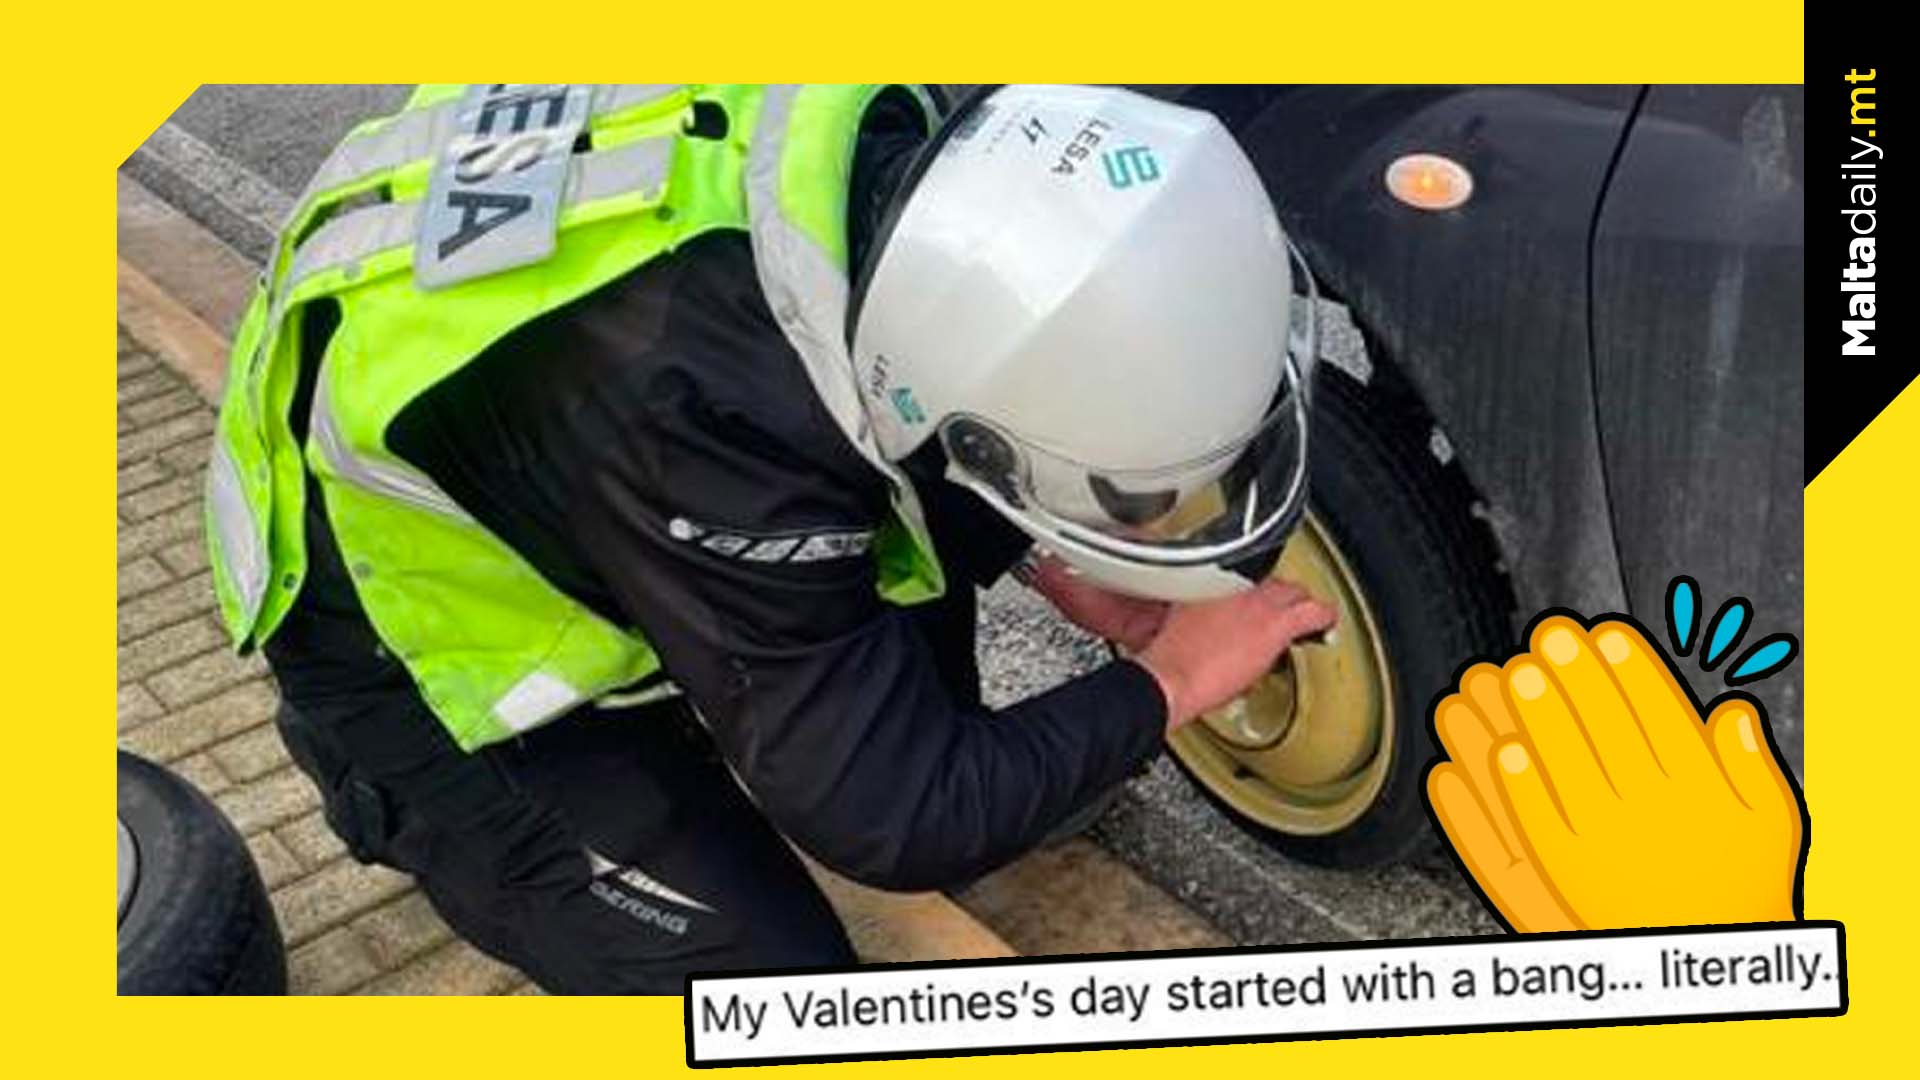 LESA officer commended for helping driver with puncture on Valentine's Day